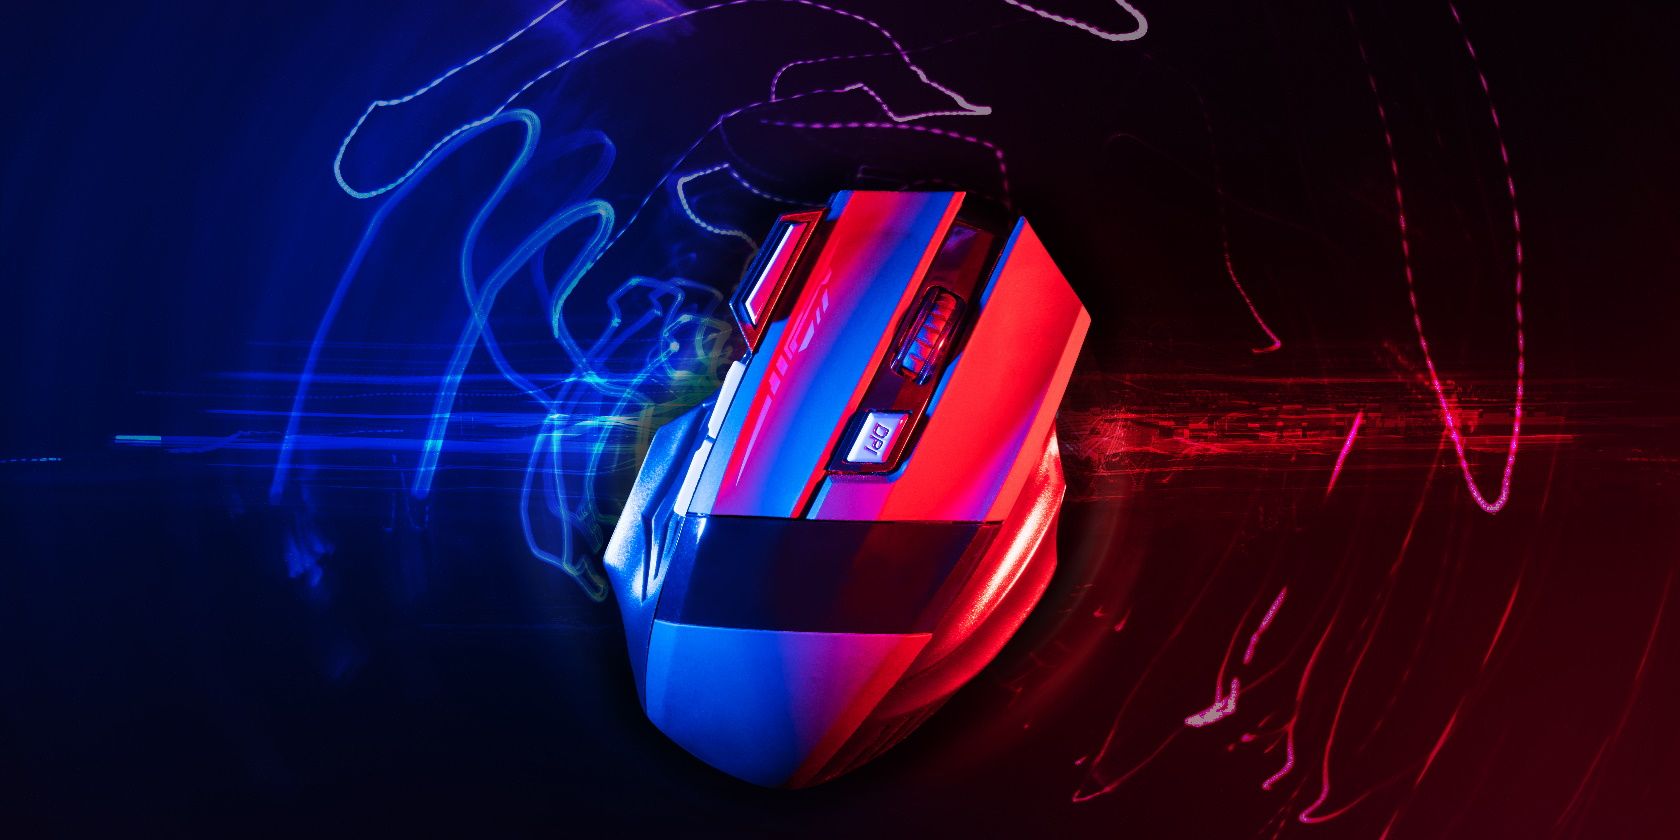 Top view of Professional wireless Game Mouse With hitech red and blue backgroud ; hight contrast